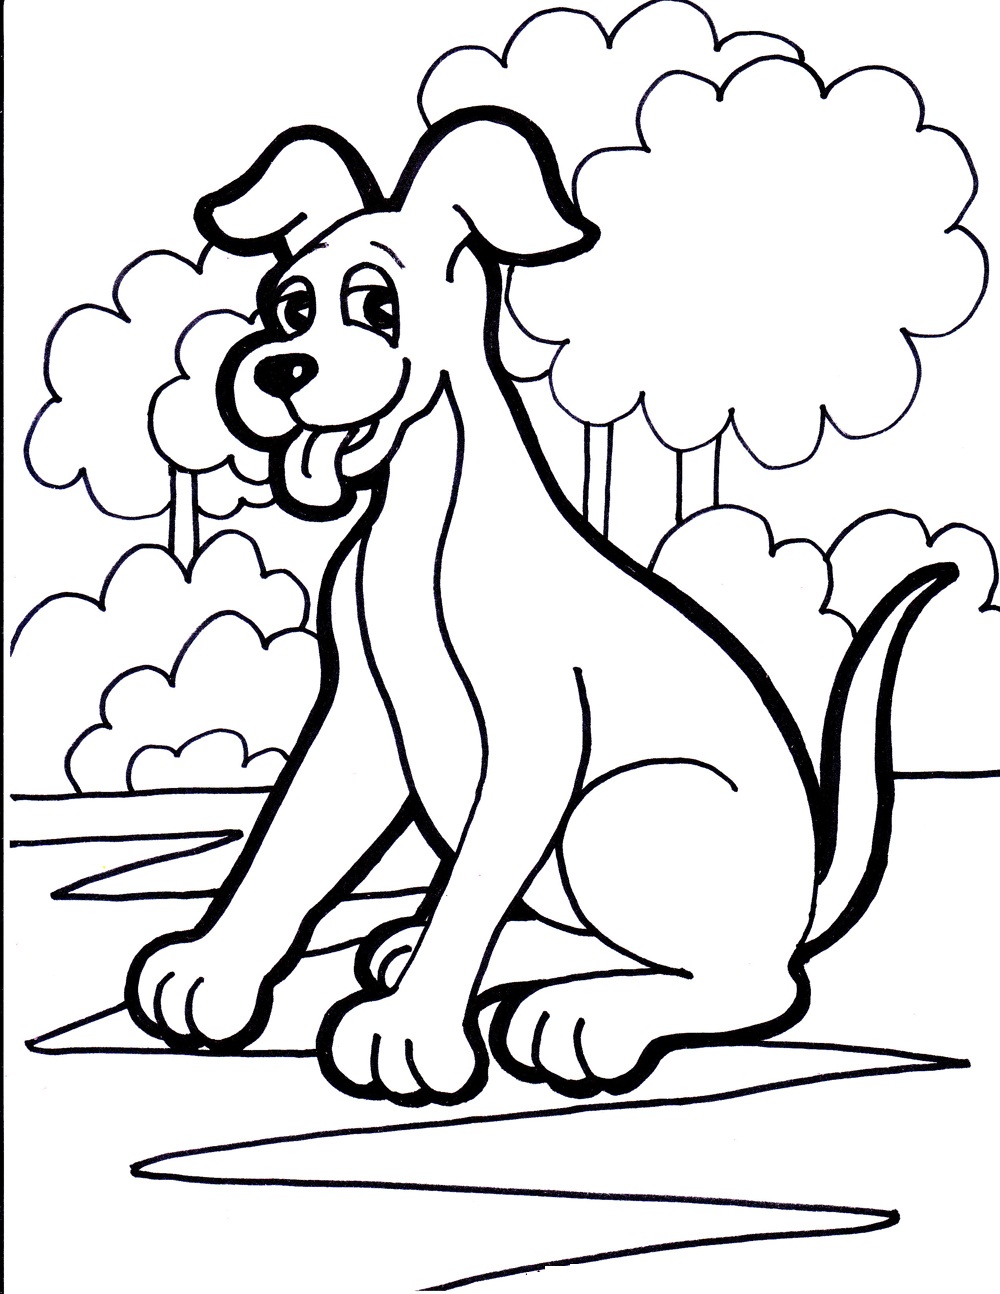 free-printable-dog-coloring-pages-for-kids